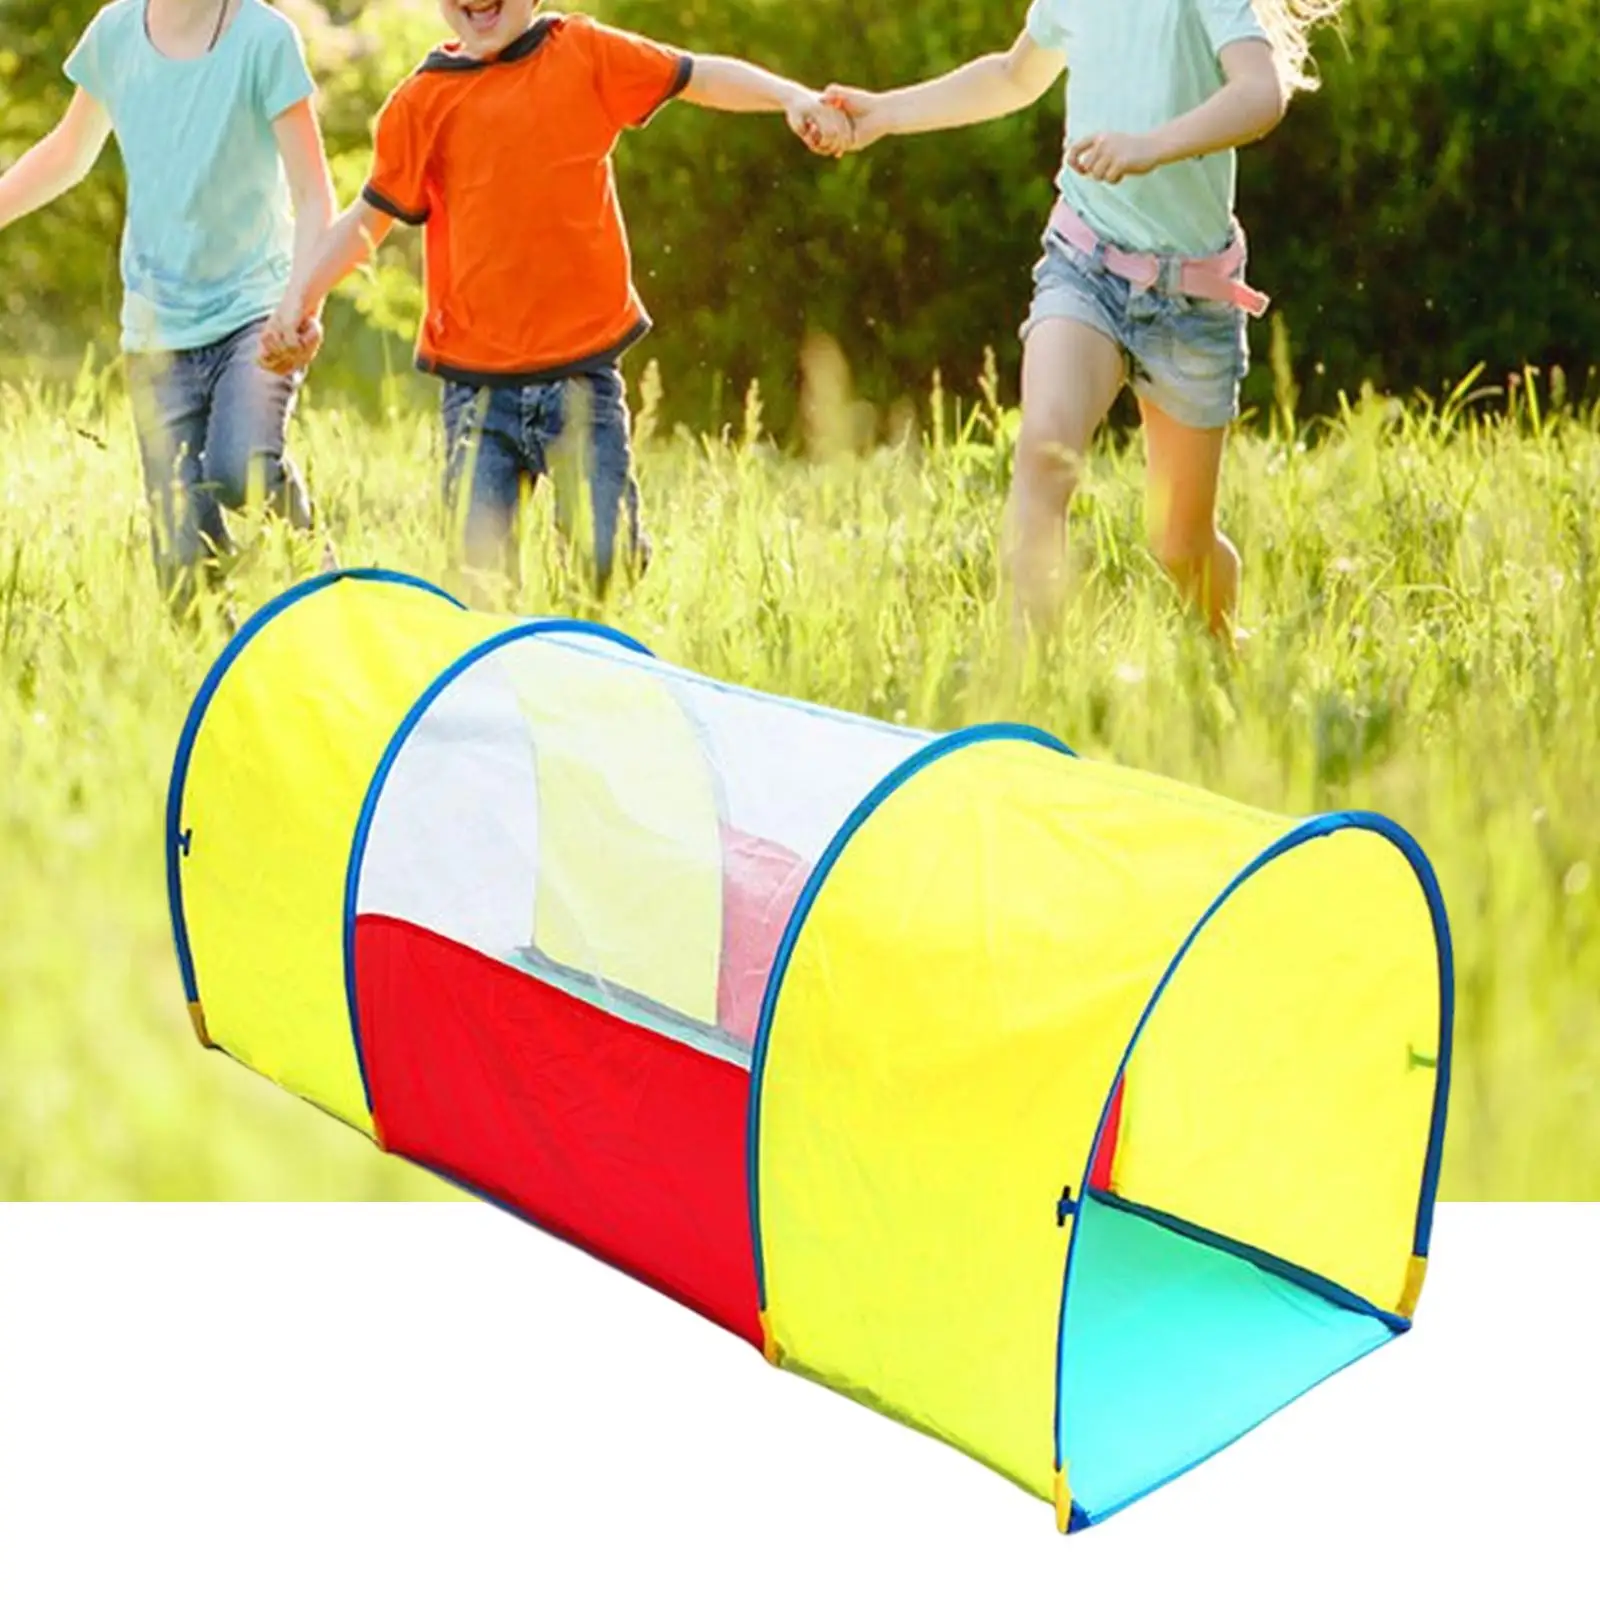 Breathable Play Tent Toy Indoor Outdoor Toy Colorful Crawl Tunnel Toy Backyard Playset for Children Girls Infants Toddlers Boys